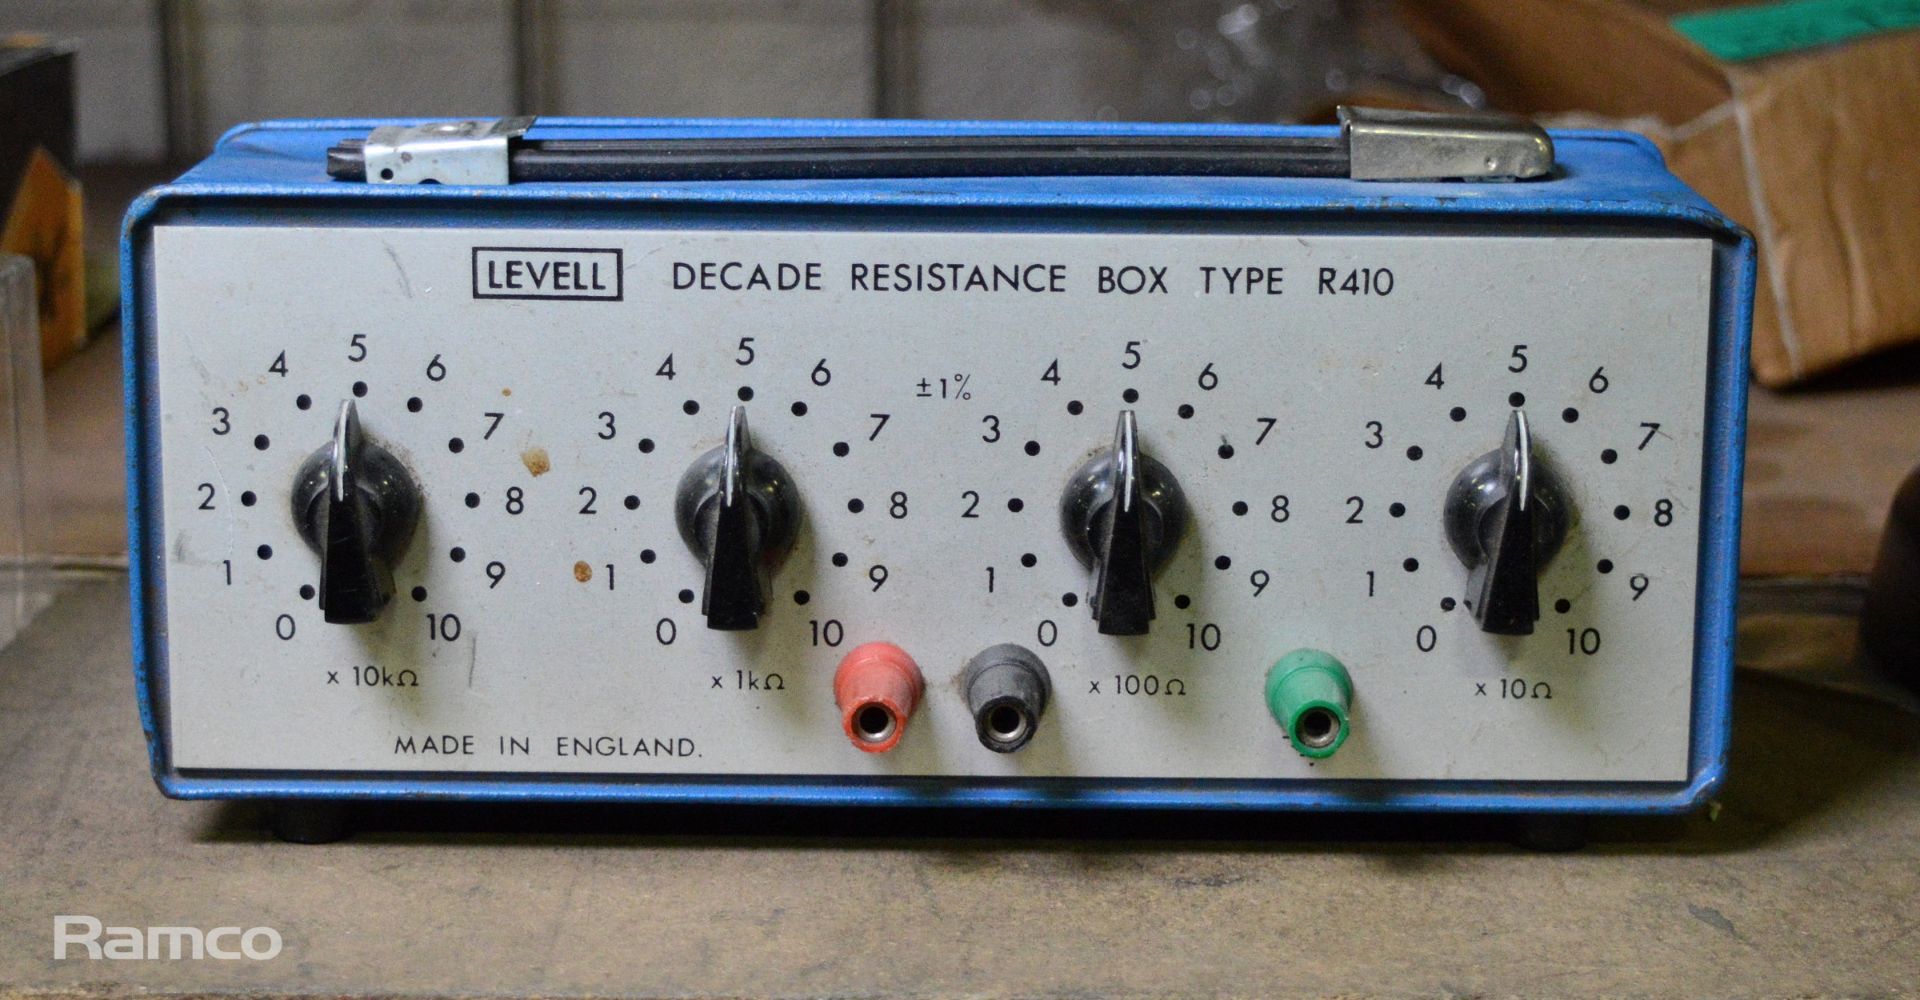 Levell Decade Resistance Box - type R410 - Image 2 of 2